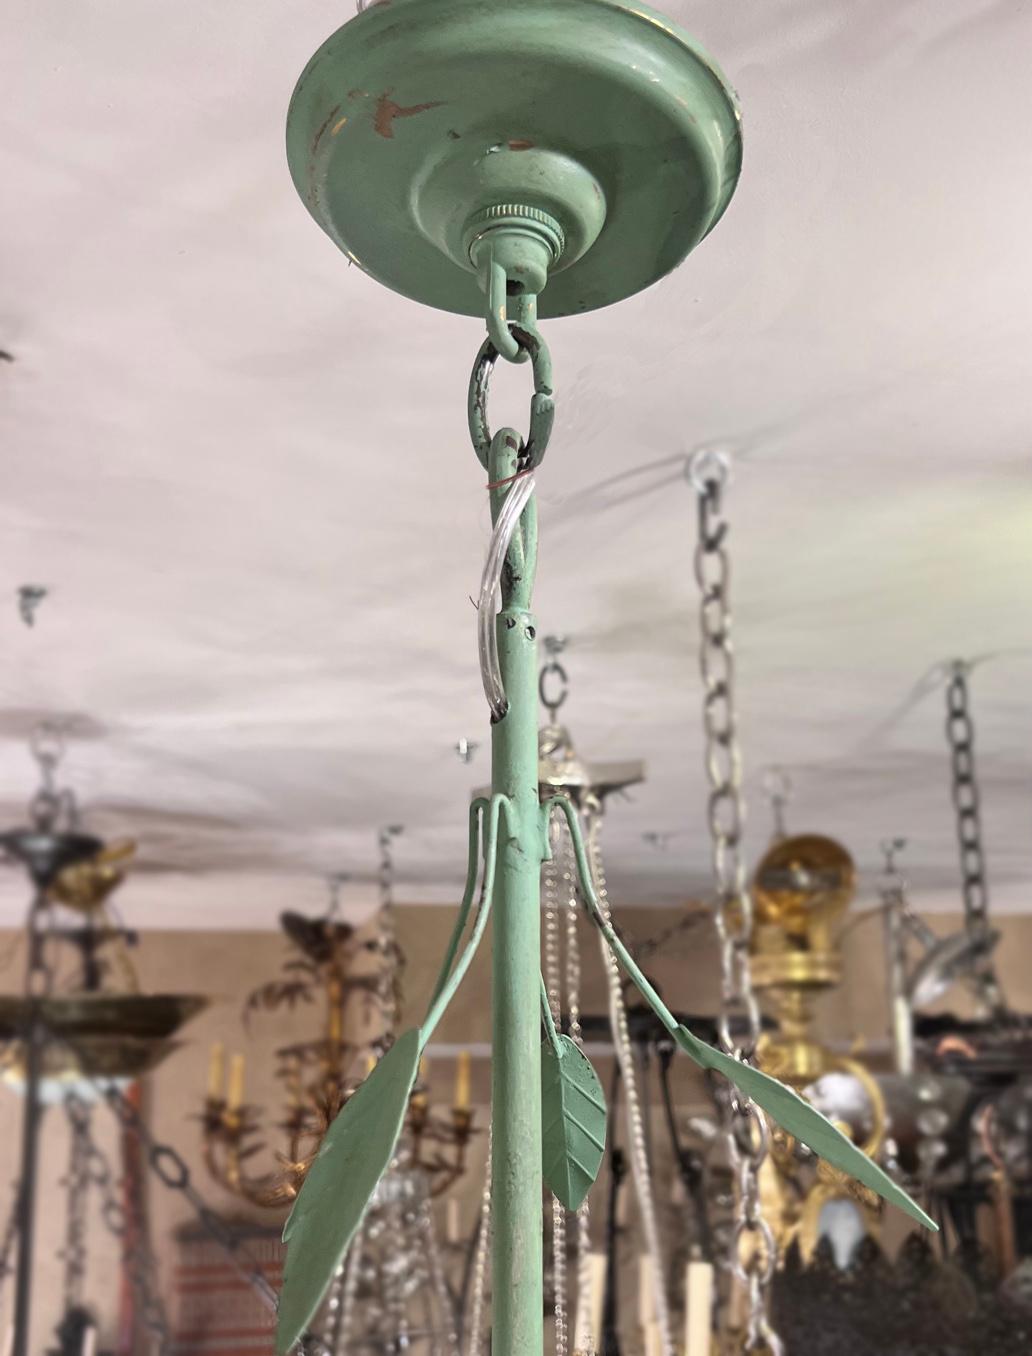 A circa 1960's Italian painted tole chandelier with 8 lights.

Measurements:
Present drop: 36.5